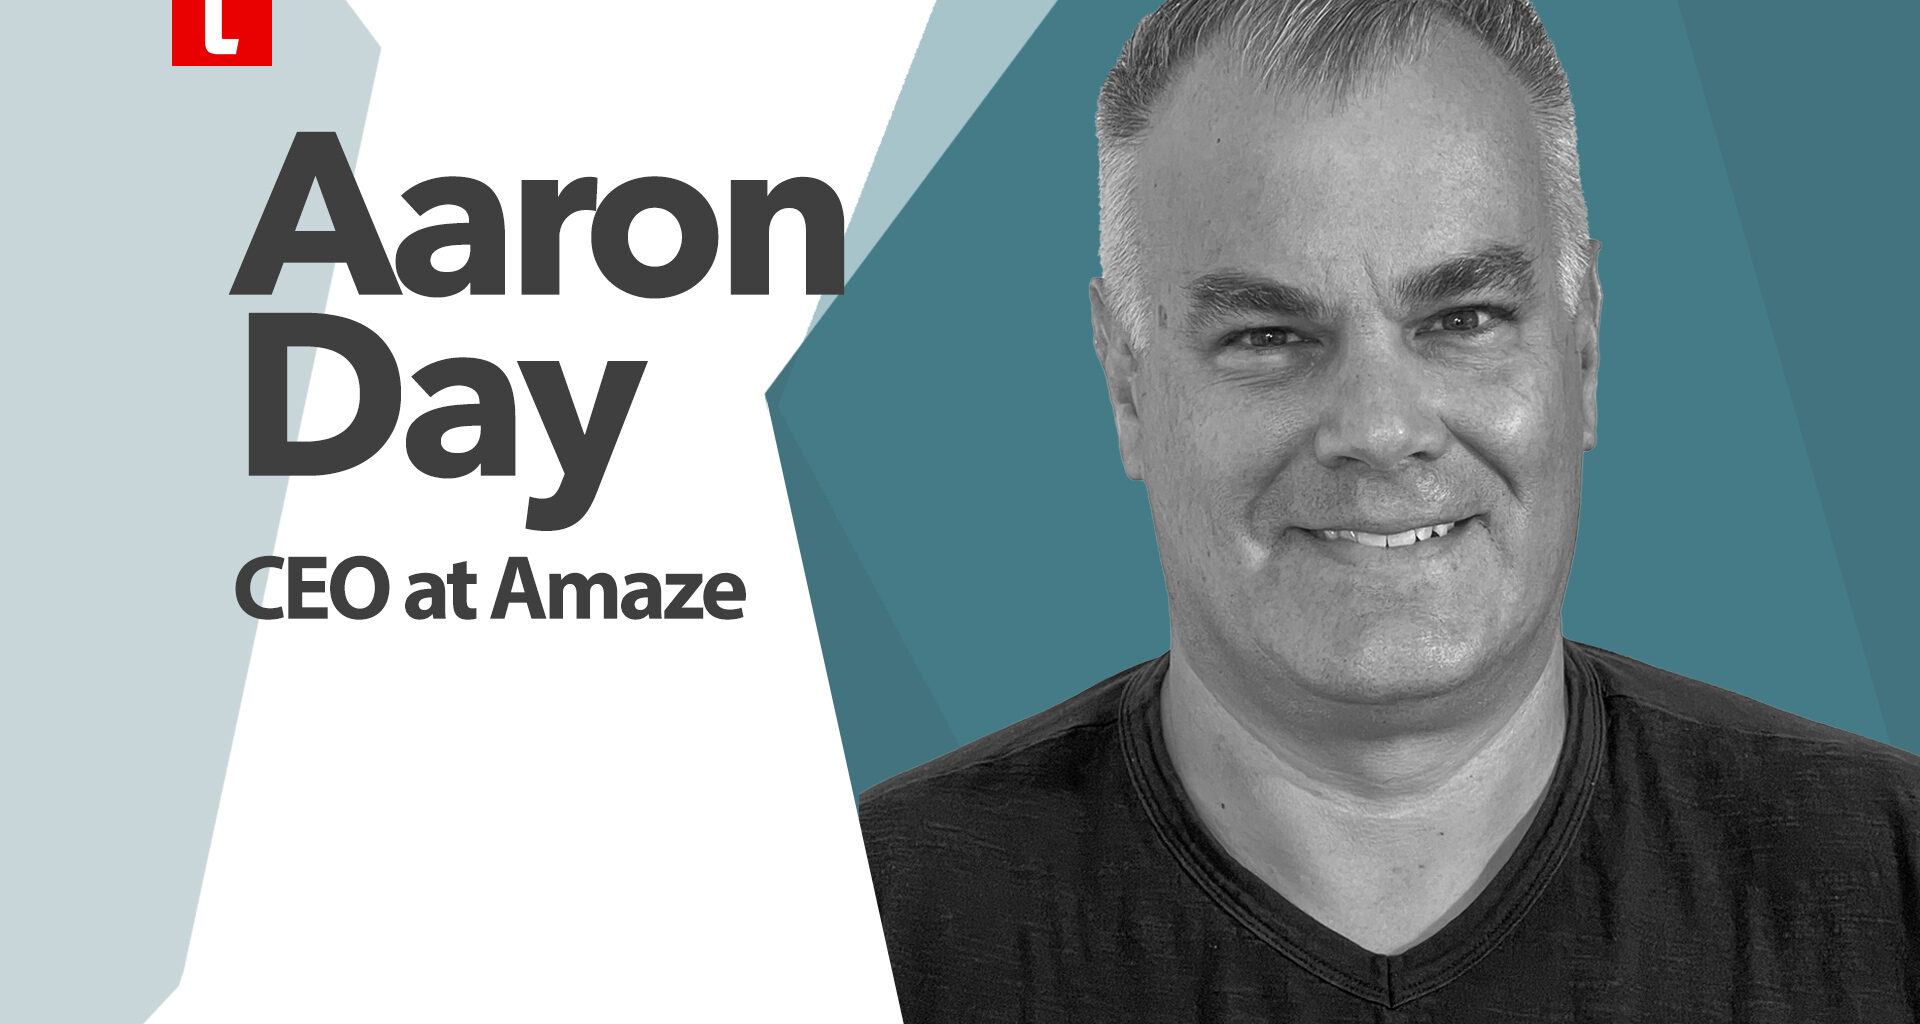 Aaron Day, CEO of Amaze